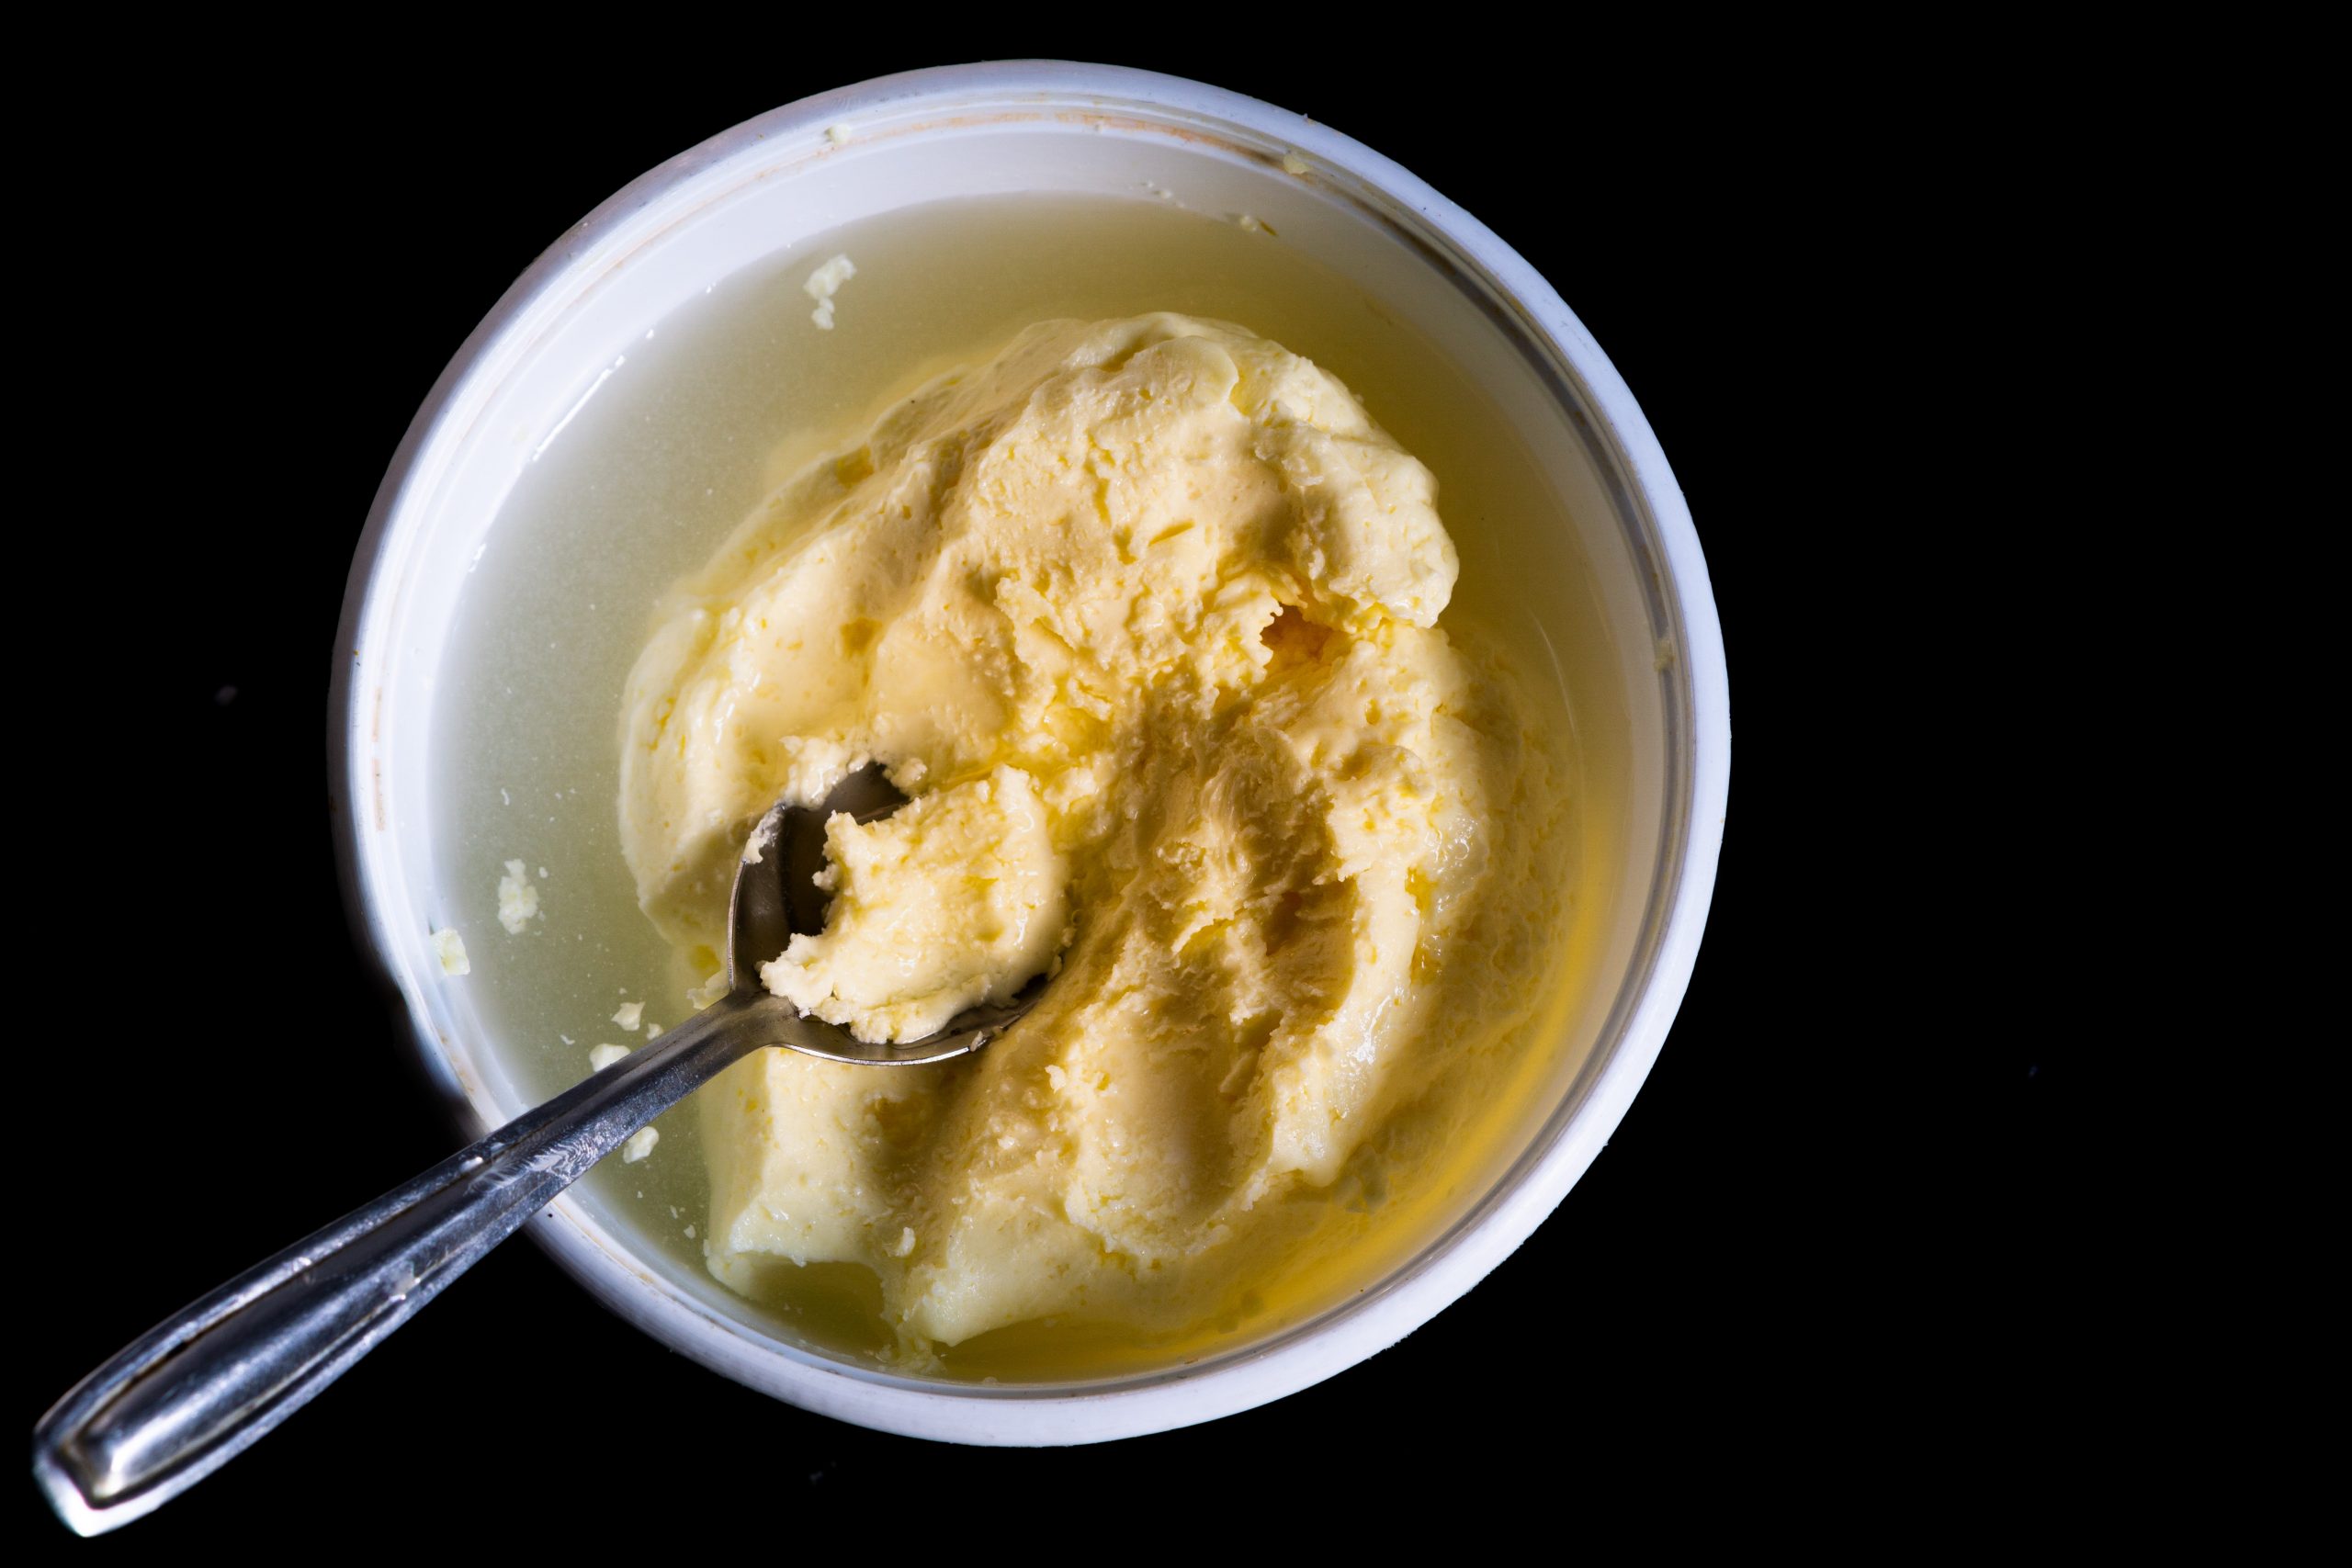 Homemade butter in a bowl